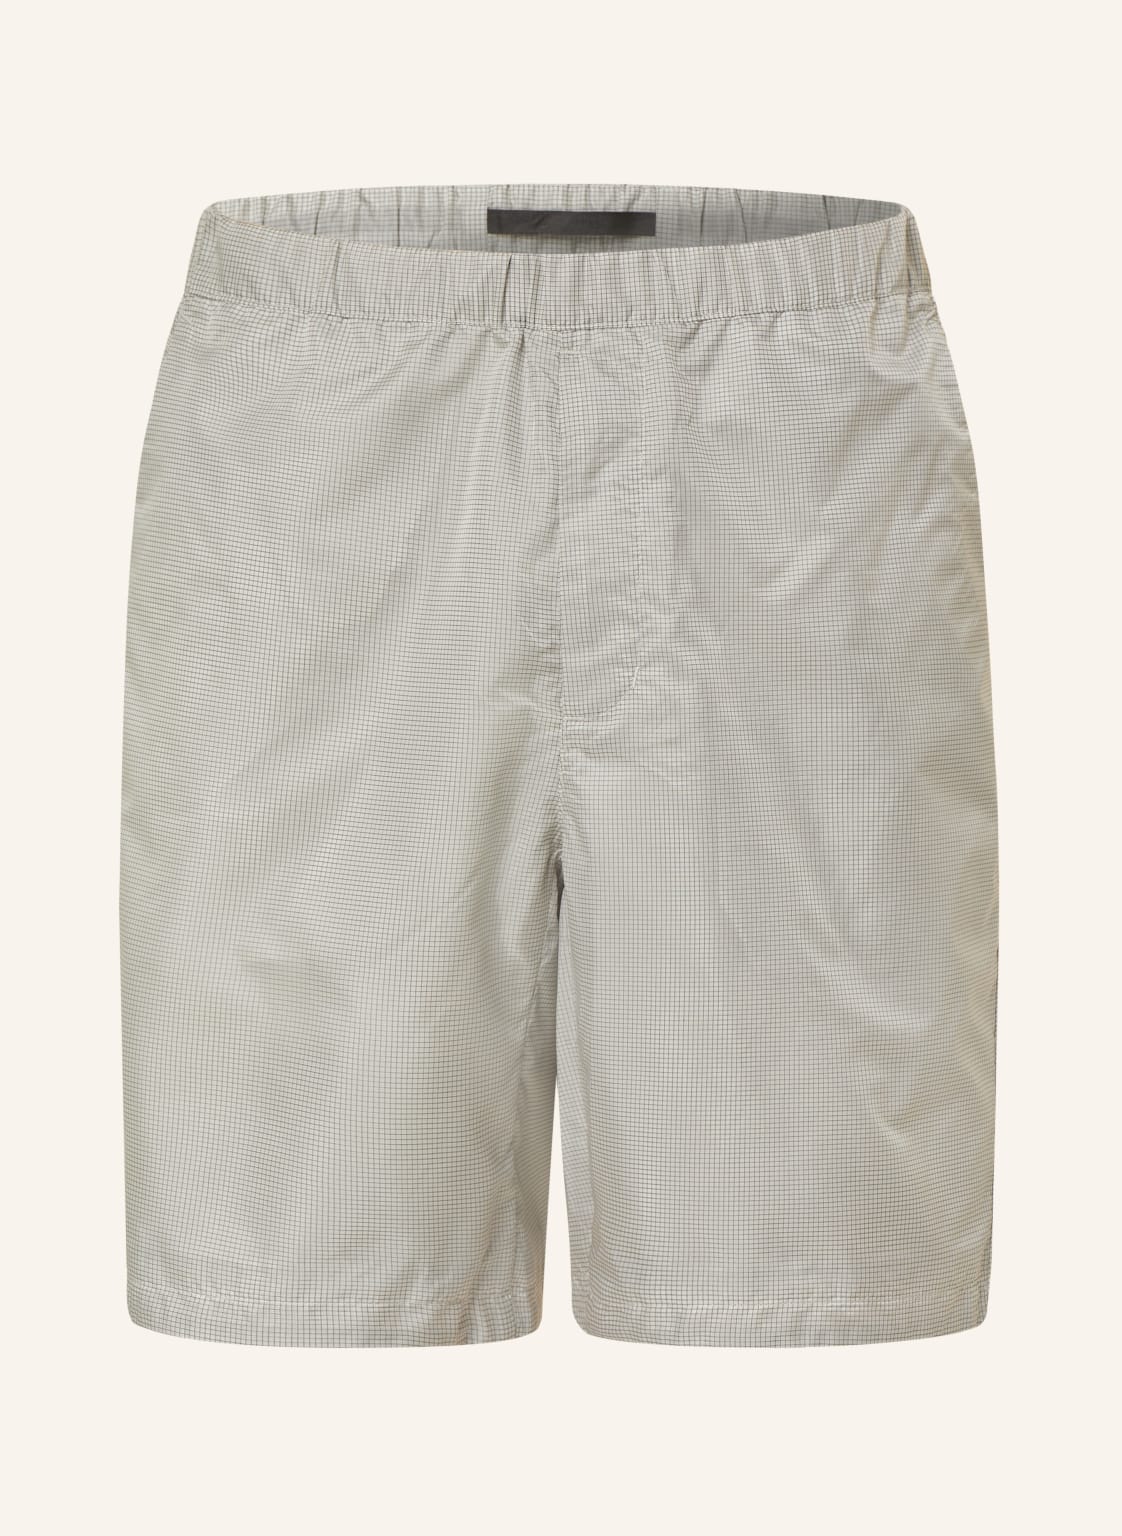 Norse Projects Shorts Pasmo grau von Norse Projects